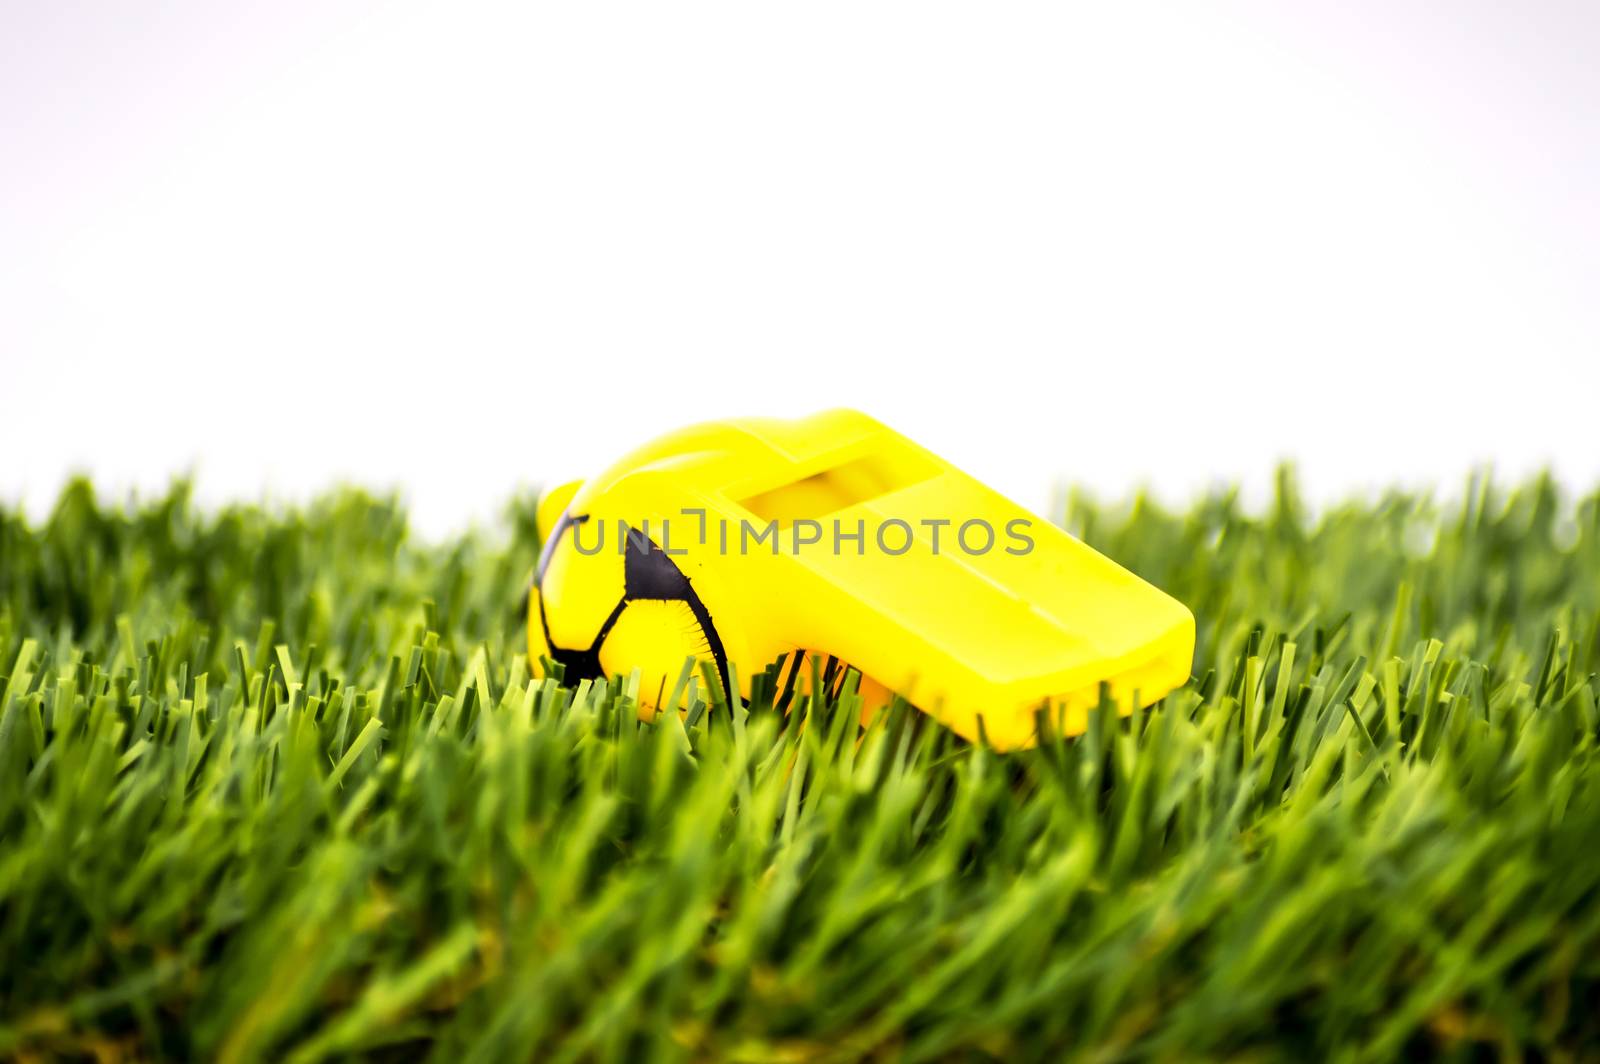 Yellow whistle soccer sports on grass background  by Philou1000